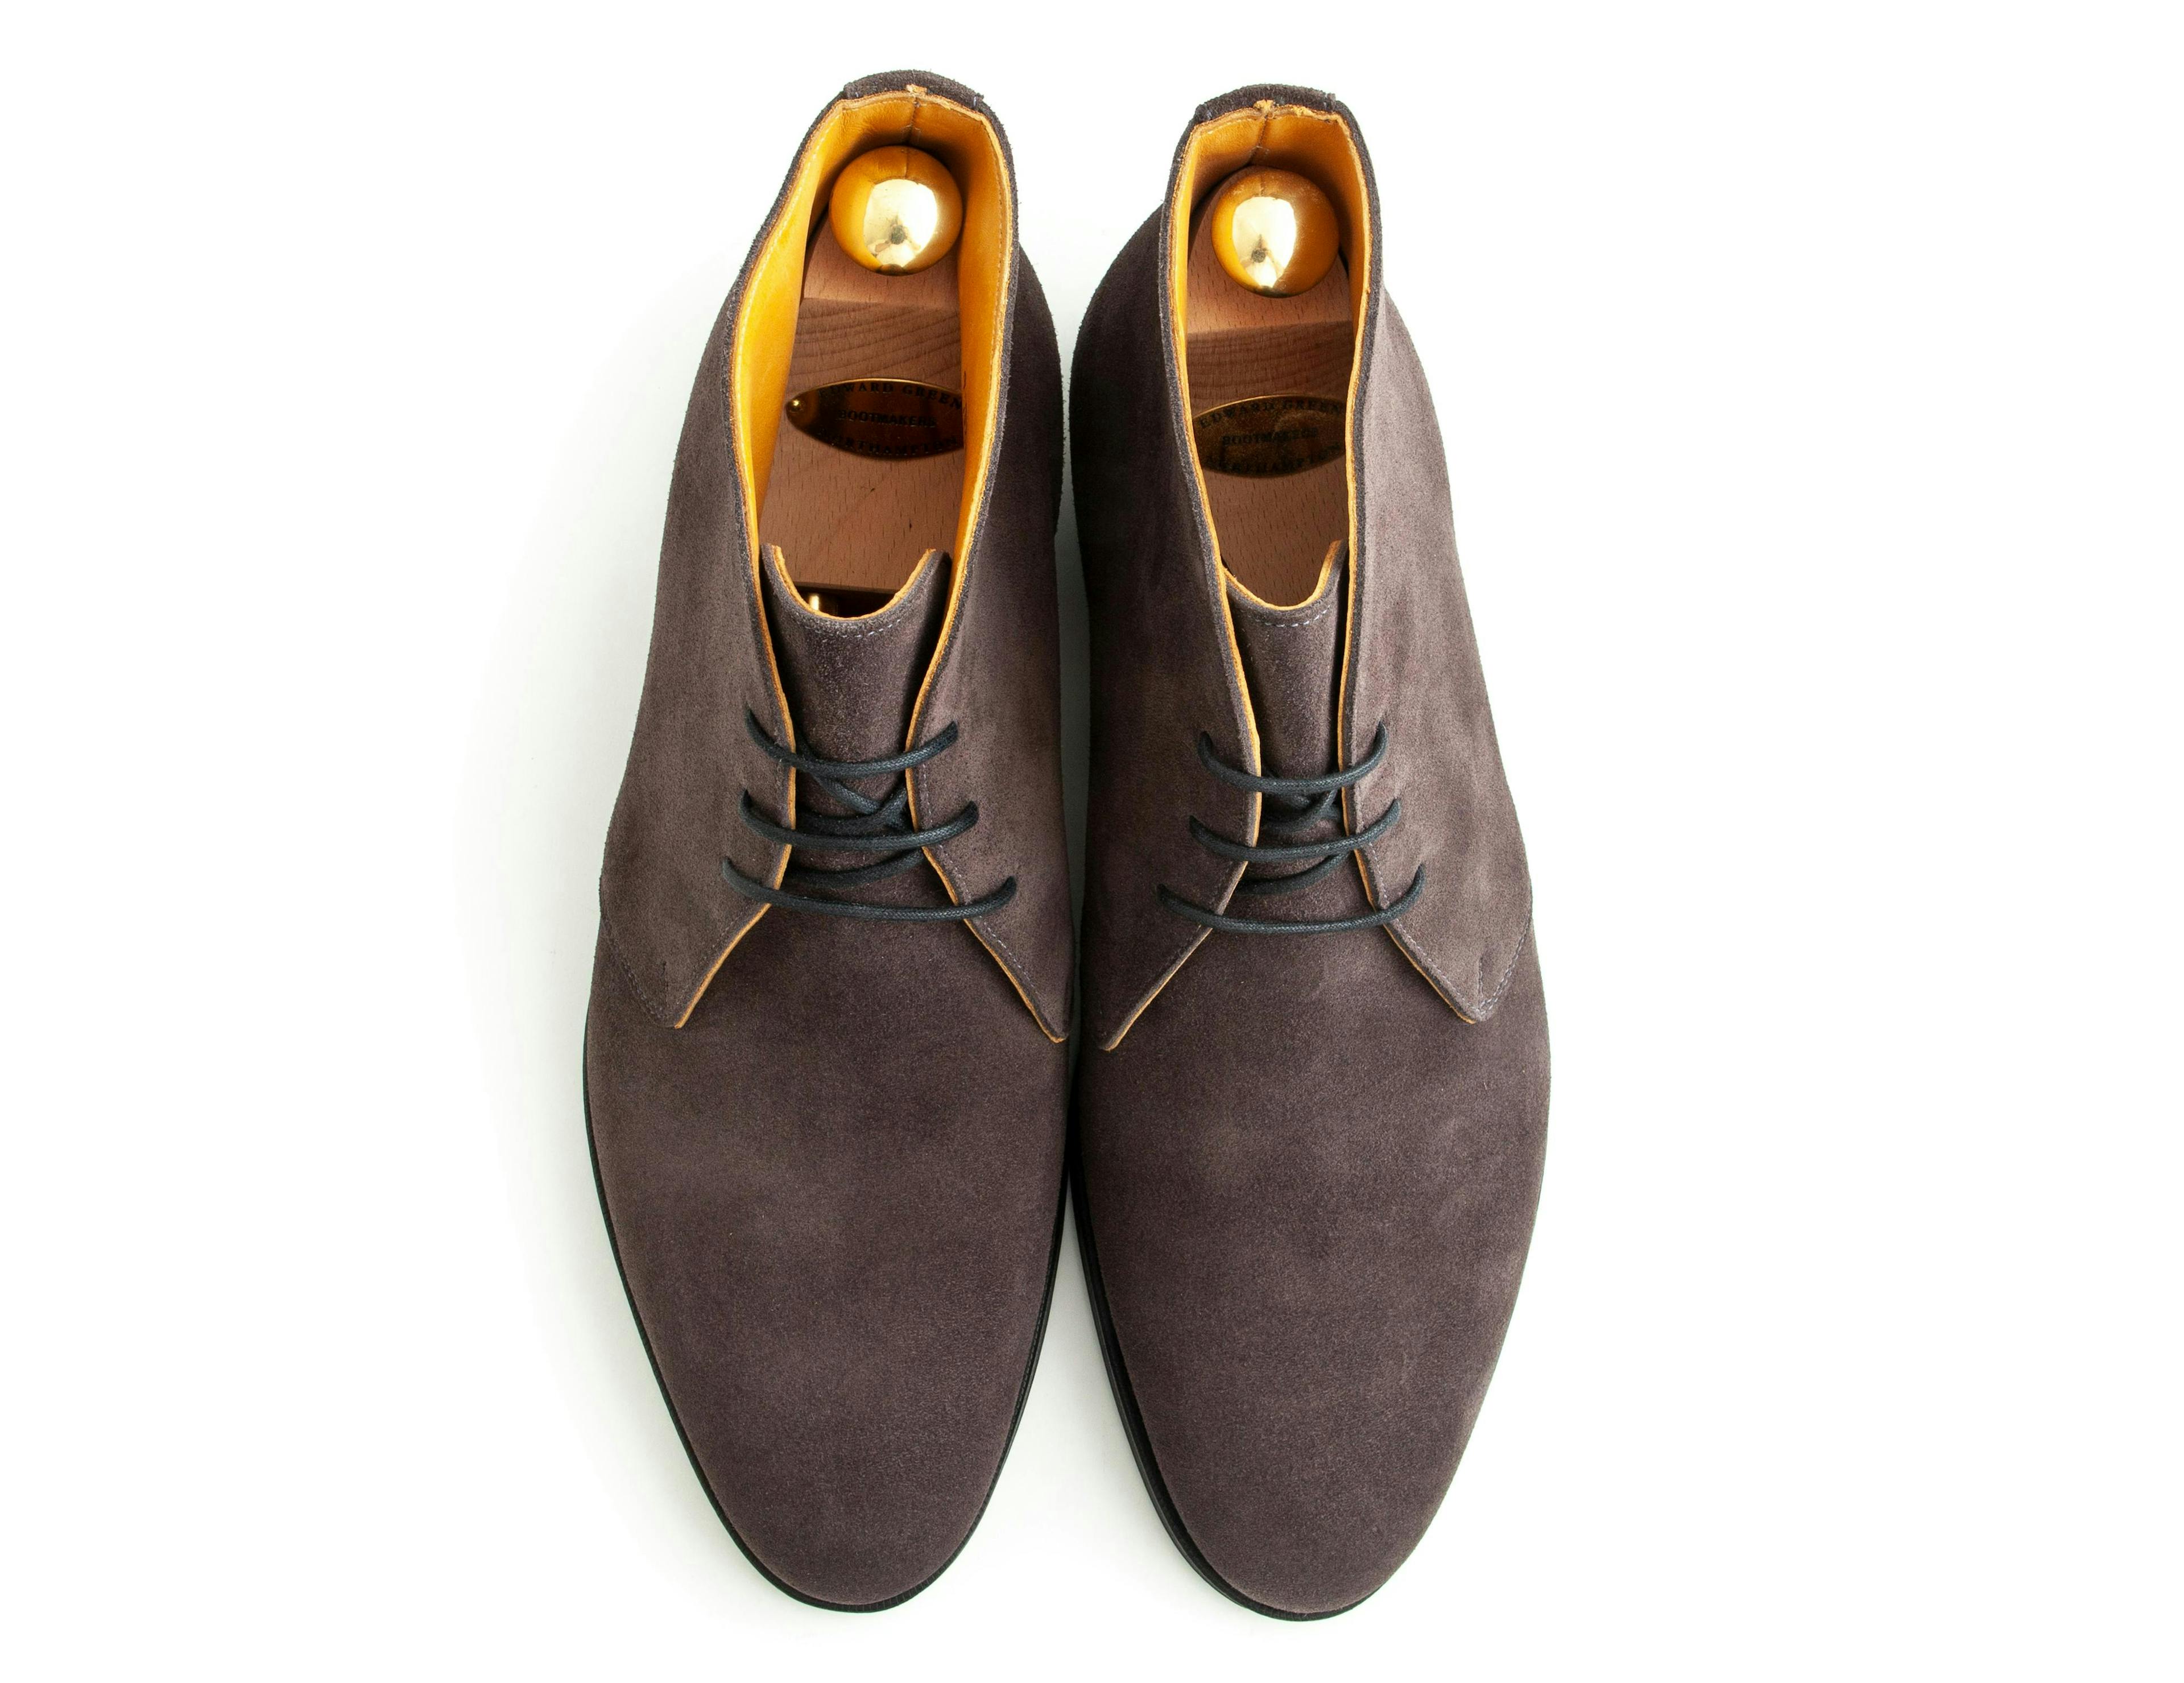 Top view of an Edward Green Banbury in lavagna suede.